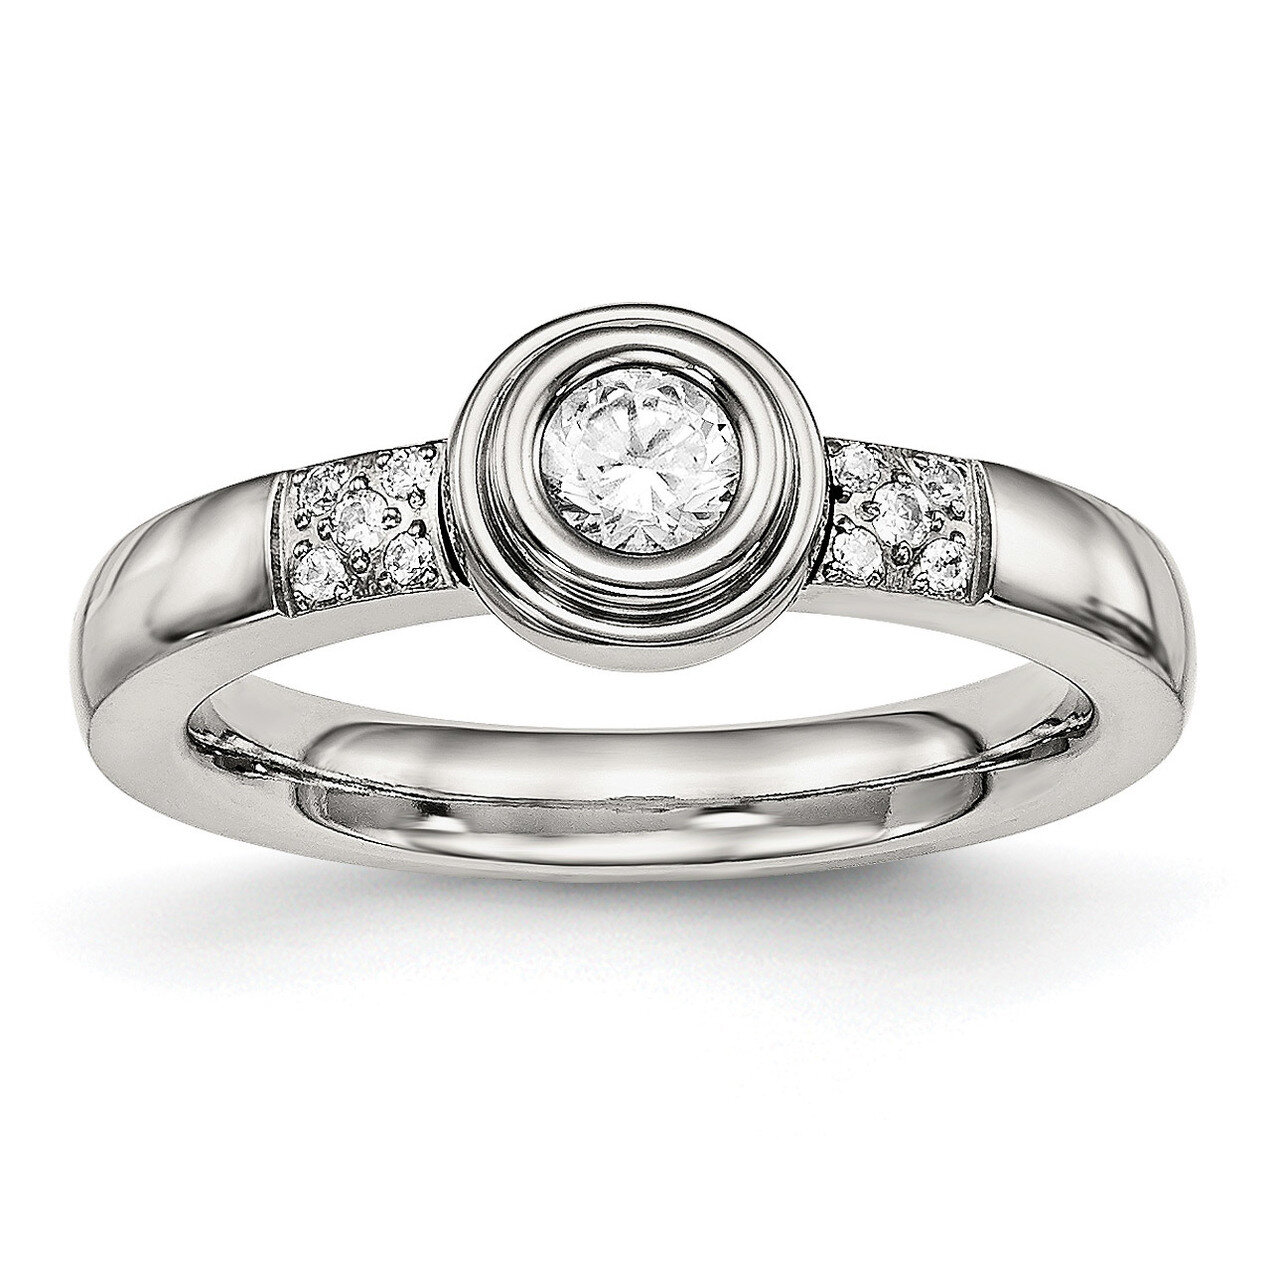 CZ Diamond Ring Stainless Steel Polished SR577